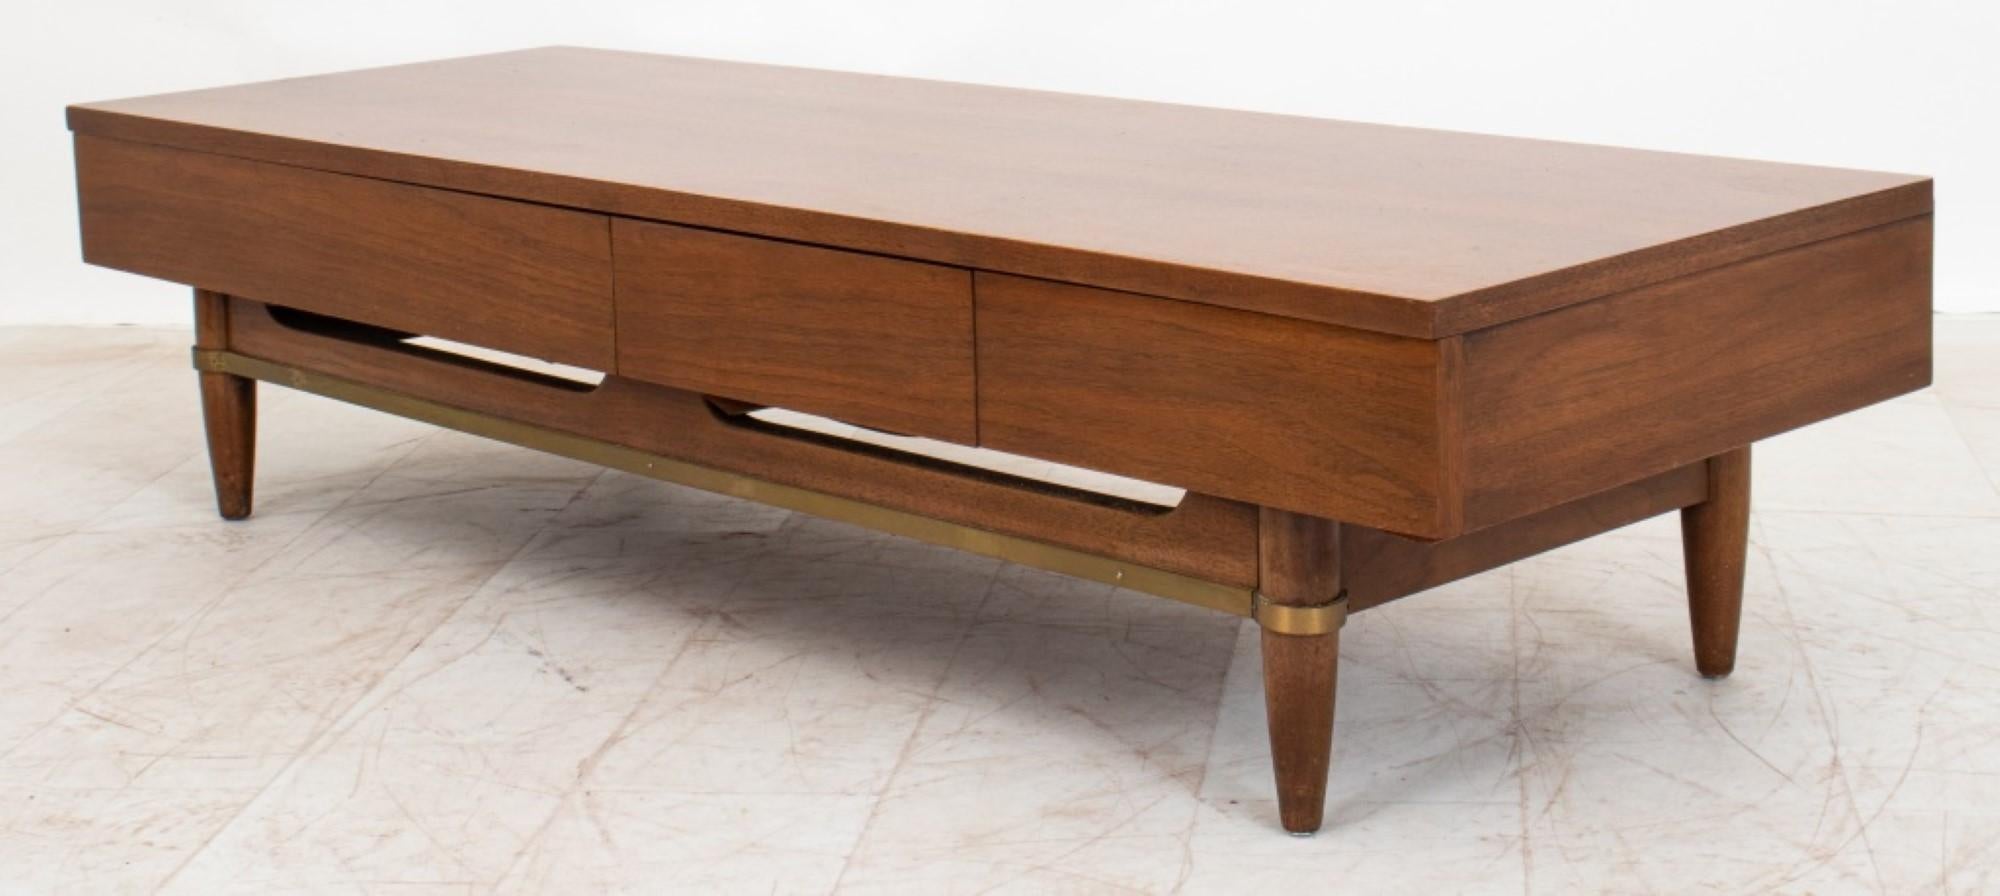 The dimensions for the Merton Gershon for American of Martinsville Mid-Century Modern Low Table / Bench / Media Cabinet in walnut.

Dealer: S138XX